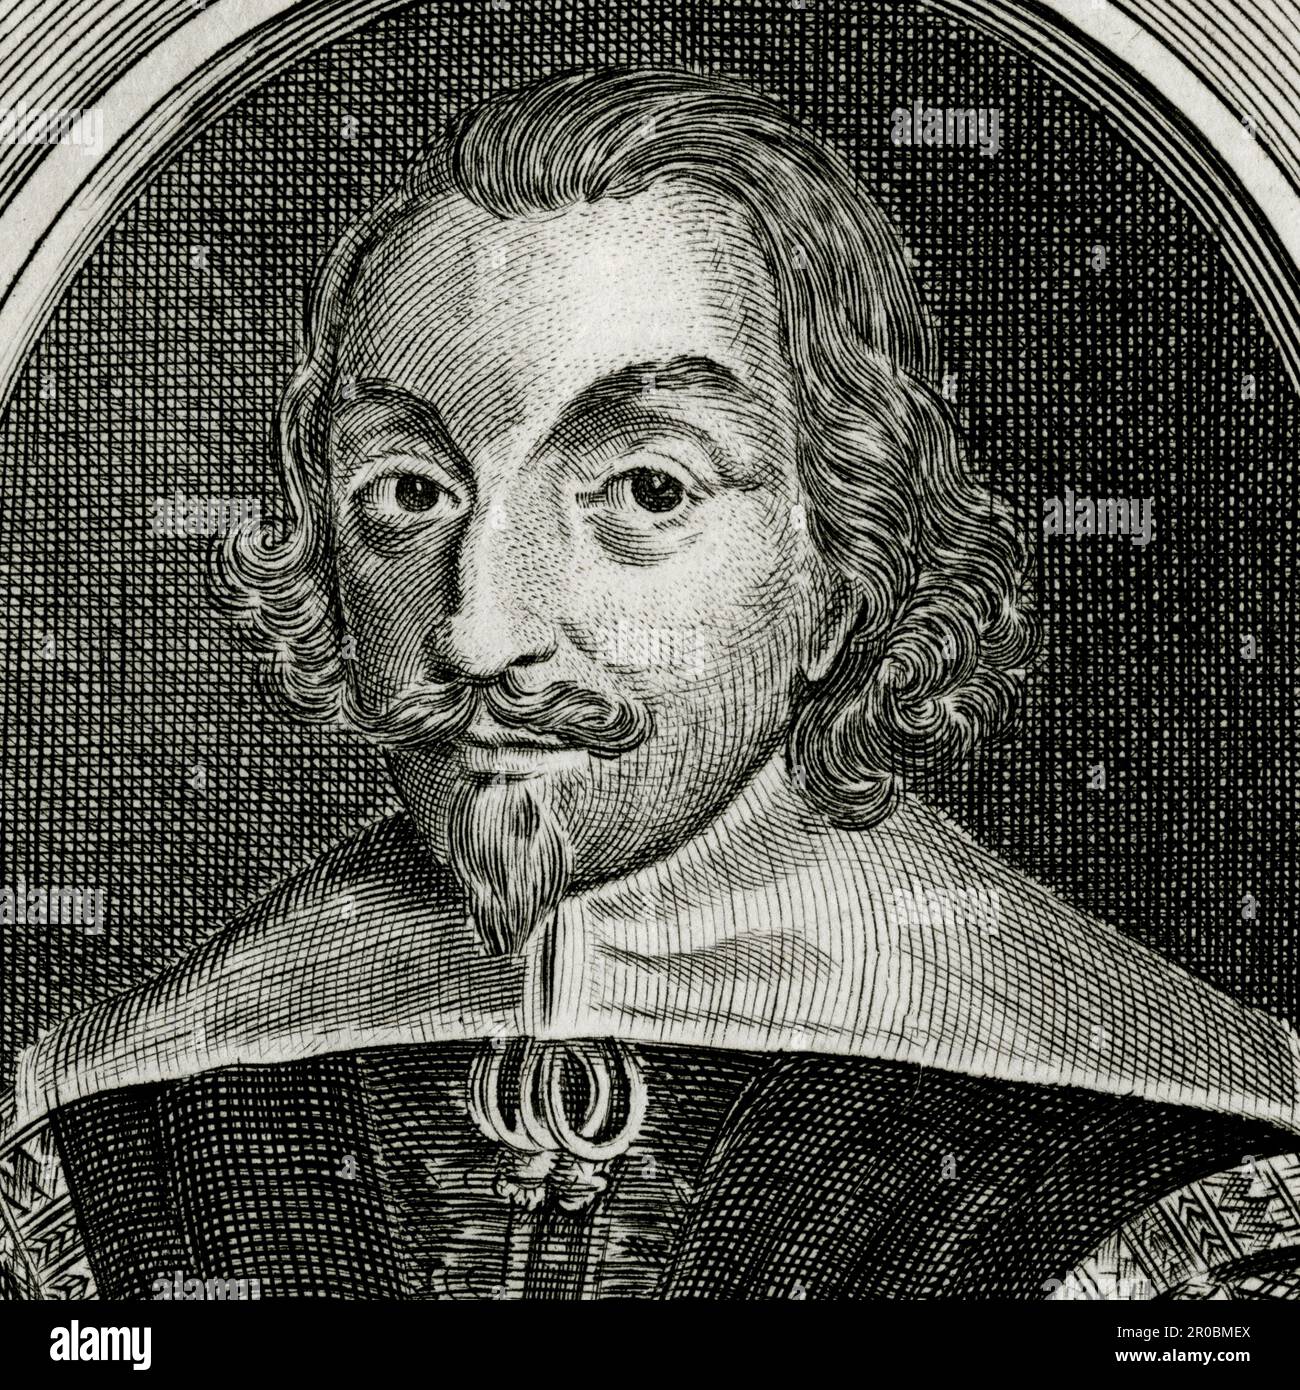 William Fiennes (1582-1662), 1st Viscount Saye & Sele, English Puritan, parliamentarian and privy counsellor, who earned the nickname 'Old Subtlety' for intrigue against the Crown prior to the English Civil War but, after the restoration of King Charles II in 1660, served as Lord Privy Seal. Square detail of an engraving created in the 1700s and used in the 1740 edition of Clarendon's Rebellion, the 'History of the Rebellion and Civil Wars in England' by Edward Hyde, Secretary of State for Foreign Affairs to King Charles I, who was later raised to the peerage as 1st Earl of Clarendon. Stock Photo